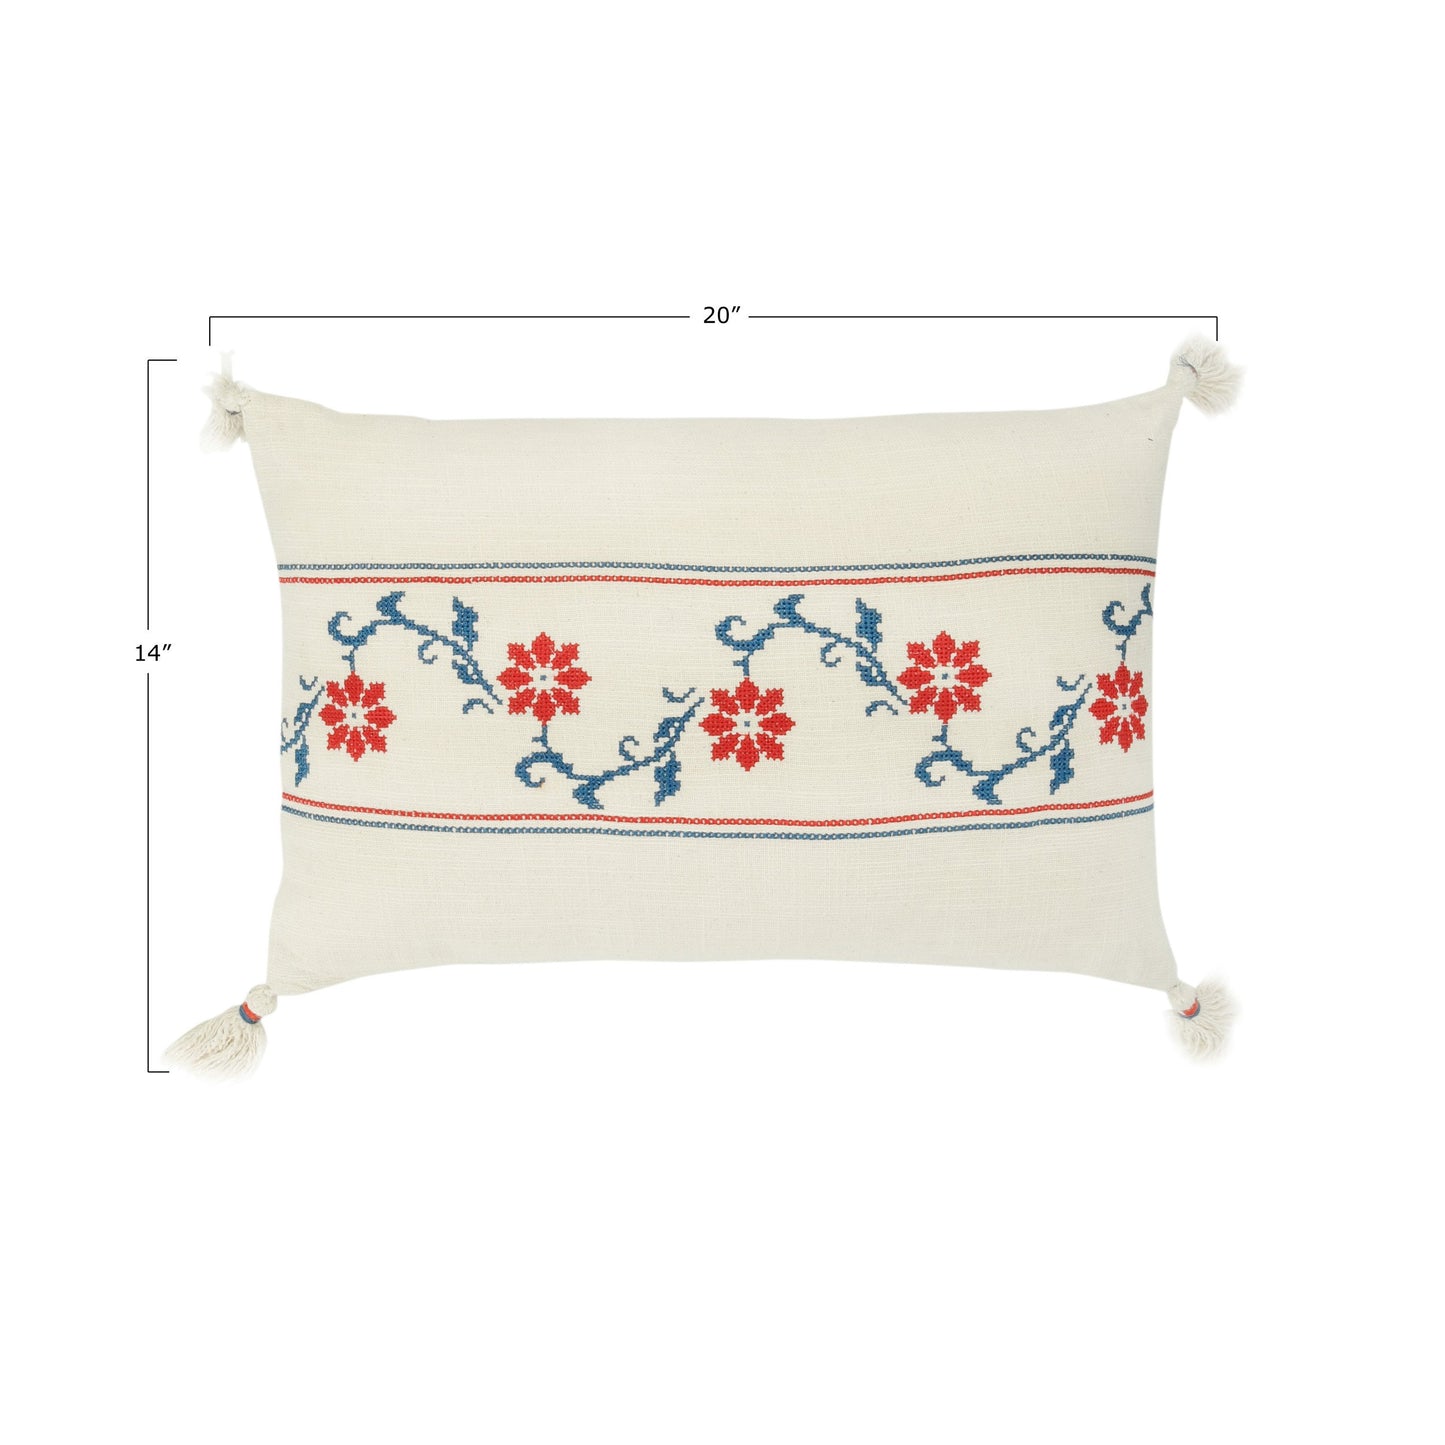 Floral Lumbar Pillow with Tassels and Embroidery